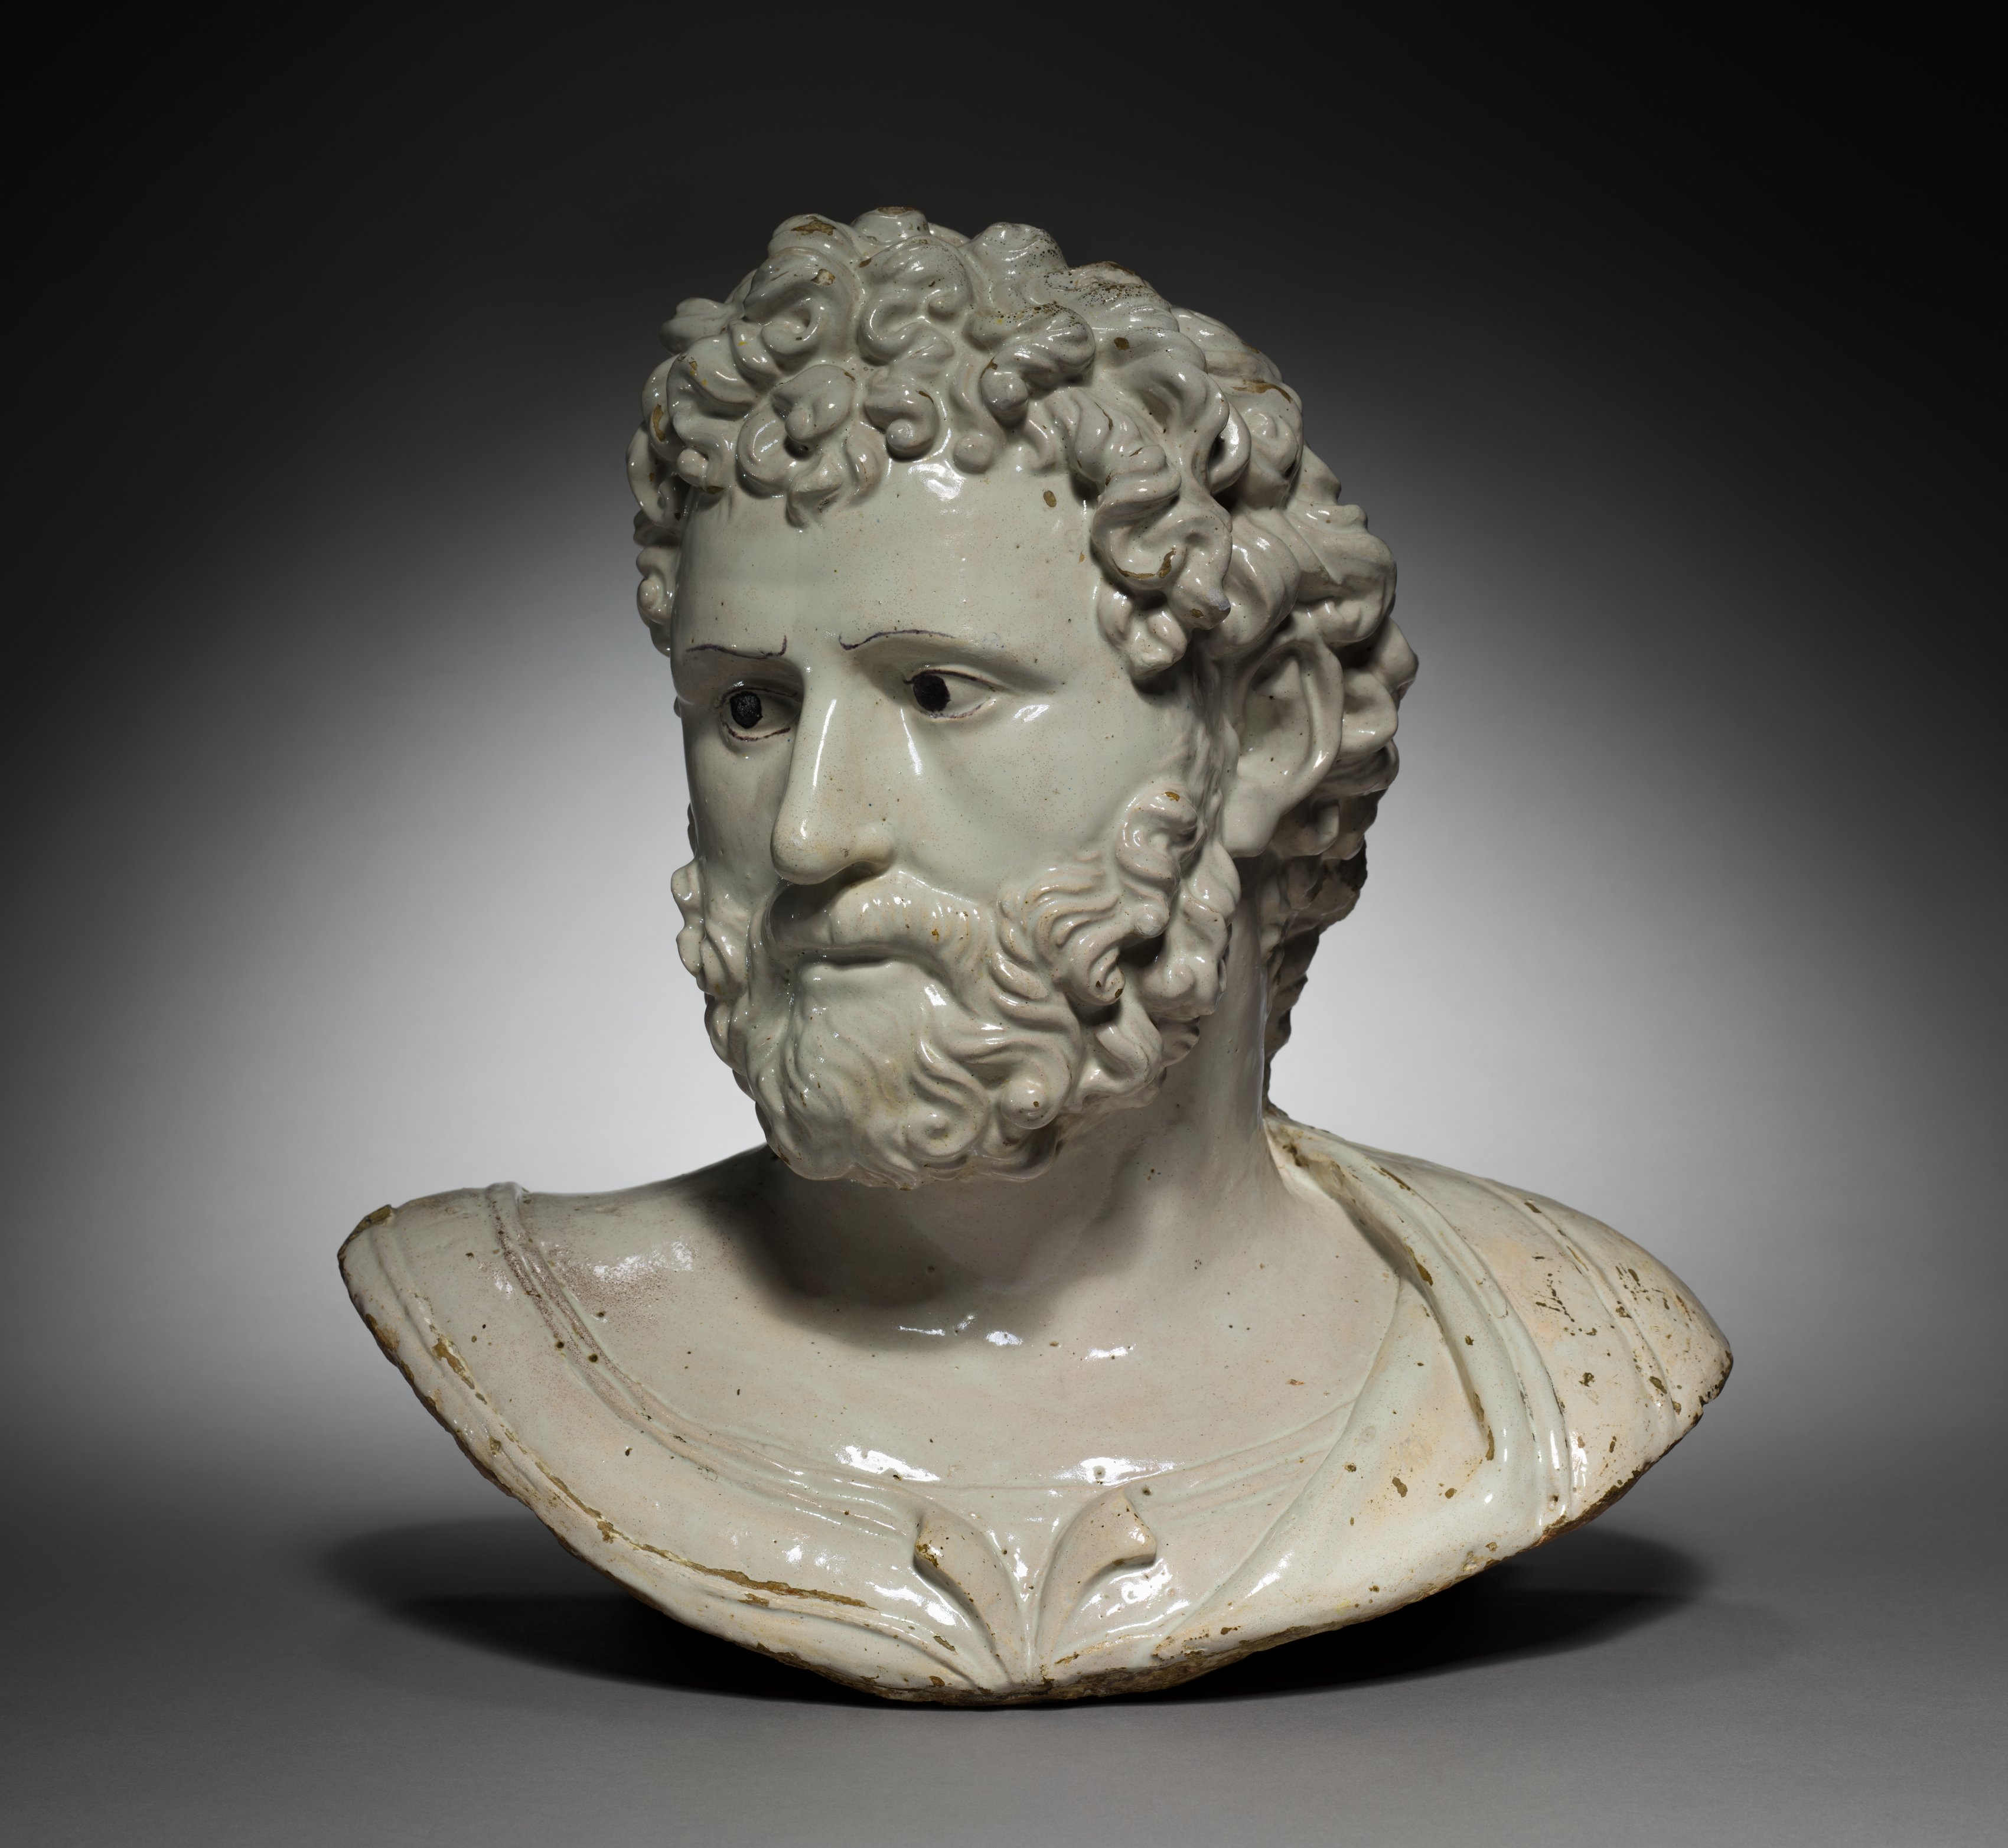 Bust of a Classical Hero or Emperor